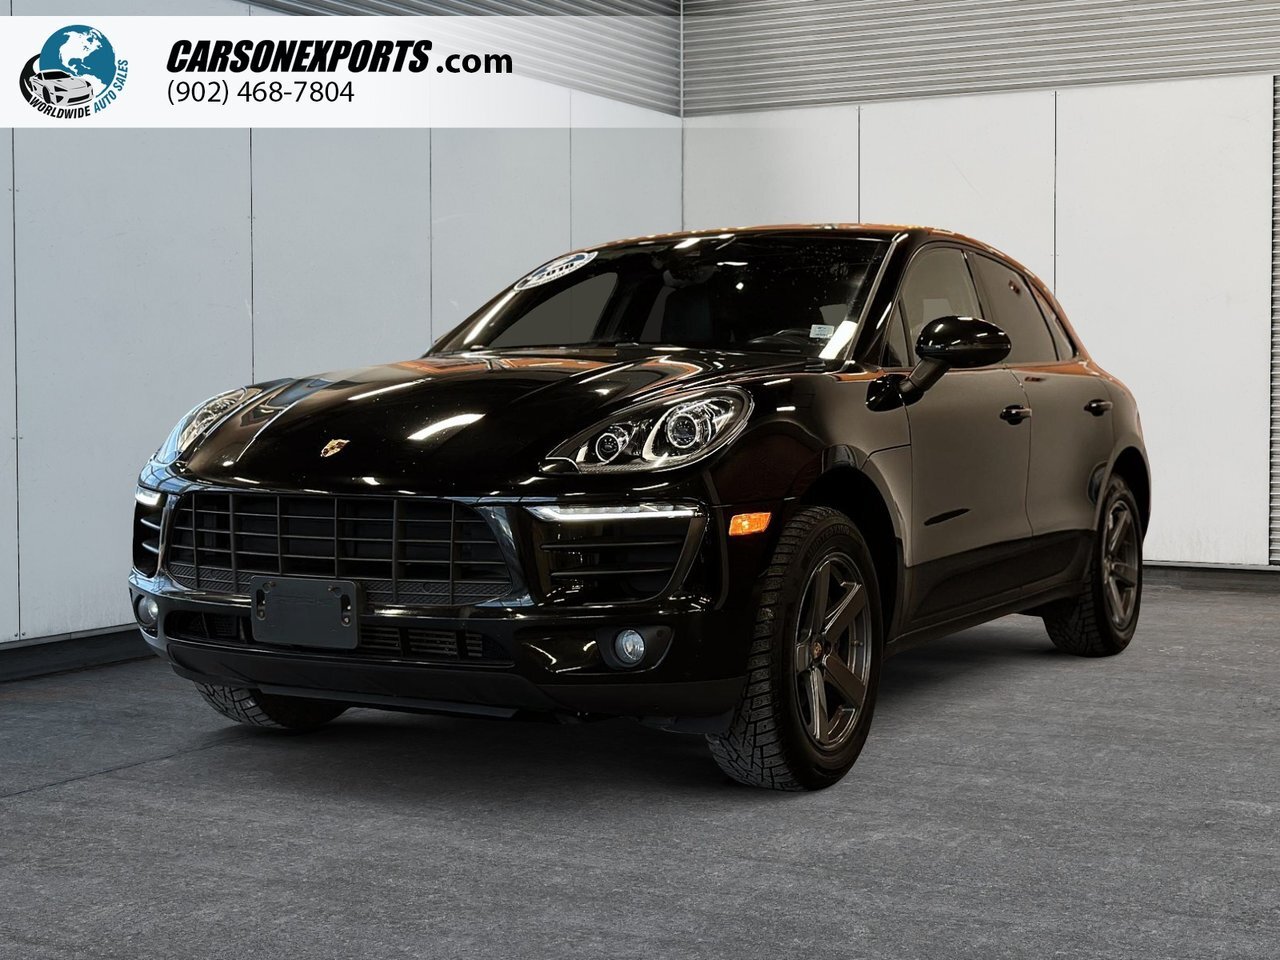 2018 Porsche Macan Base The best place to buy a used car. Period.